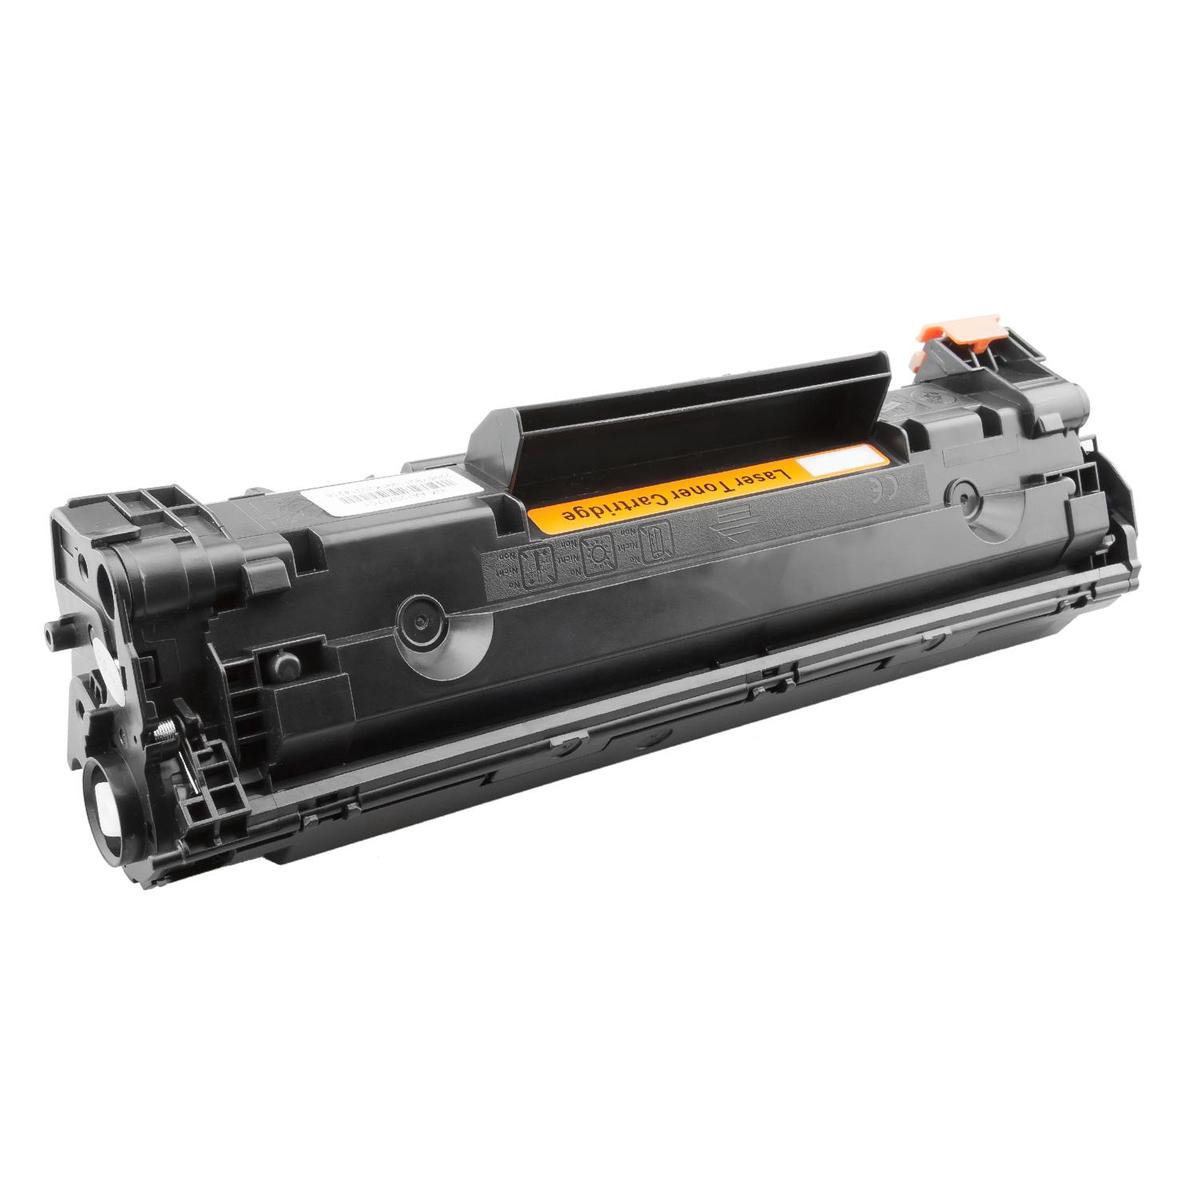 ActiveJet AT-78AN toner voor HP-printer; HP 78A CE278A, Canon CGR-728 vervanging; Premie; 2100 pagina's; zwart.